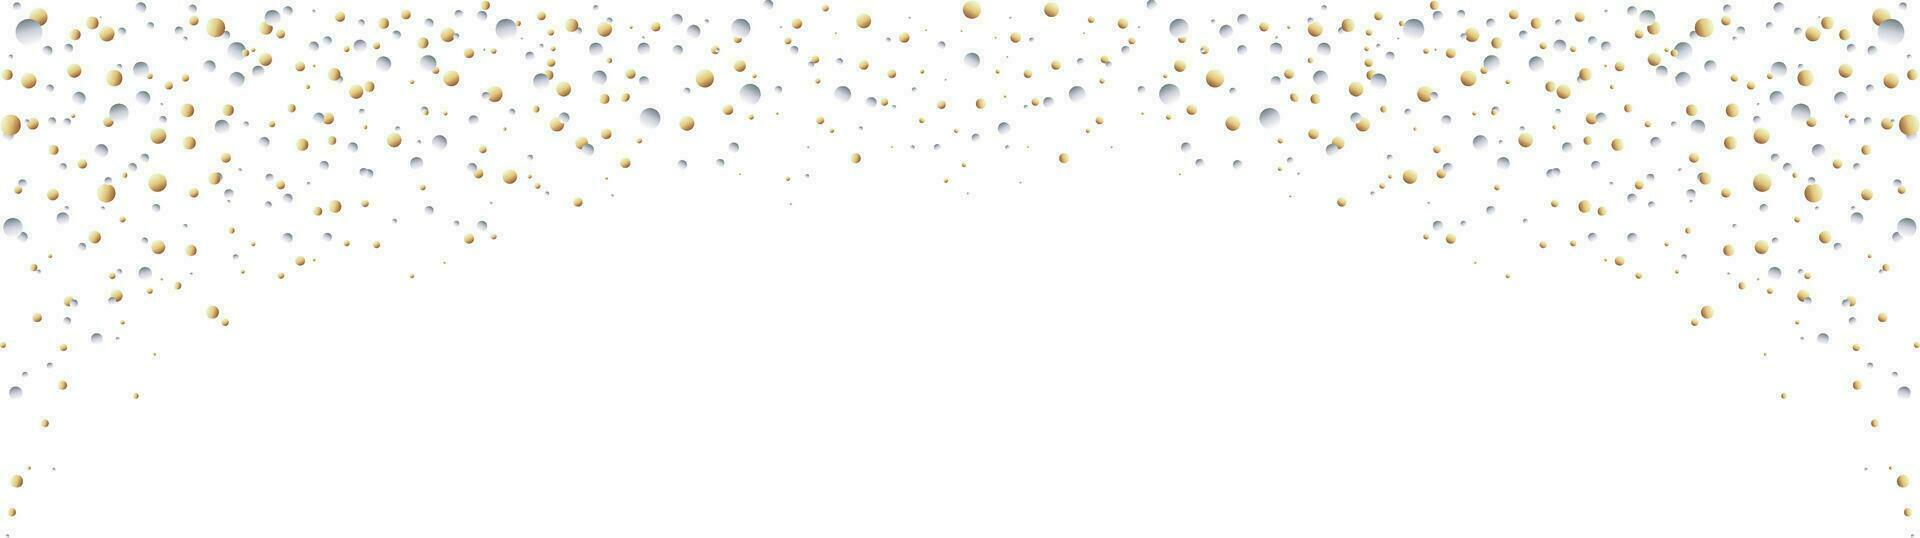 Gold and silver abstract glitter confetti isolated on white background vector